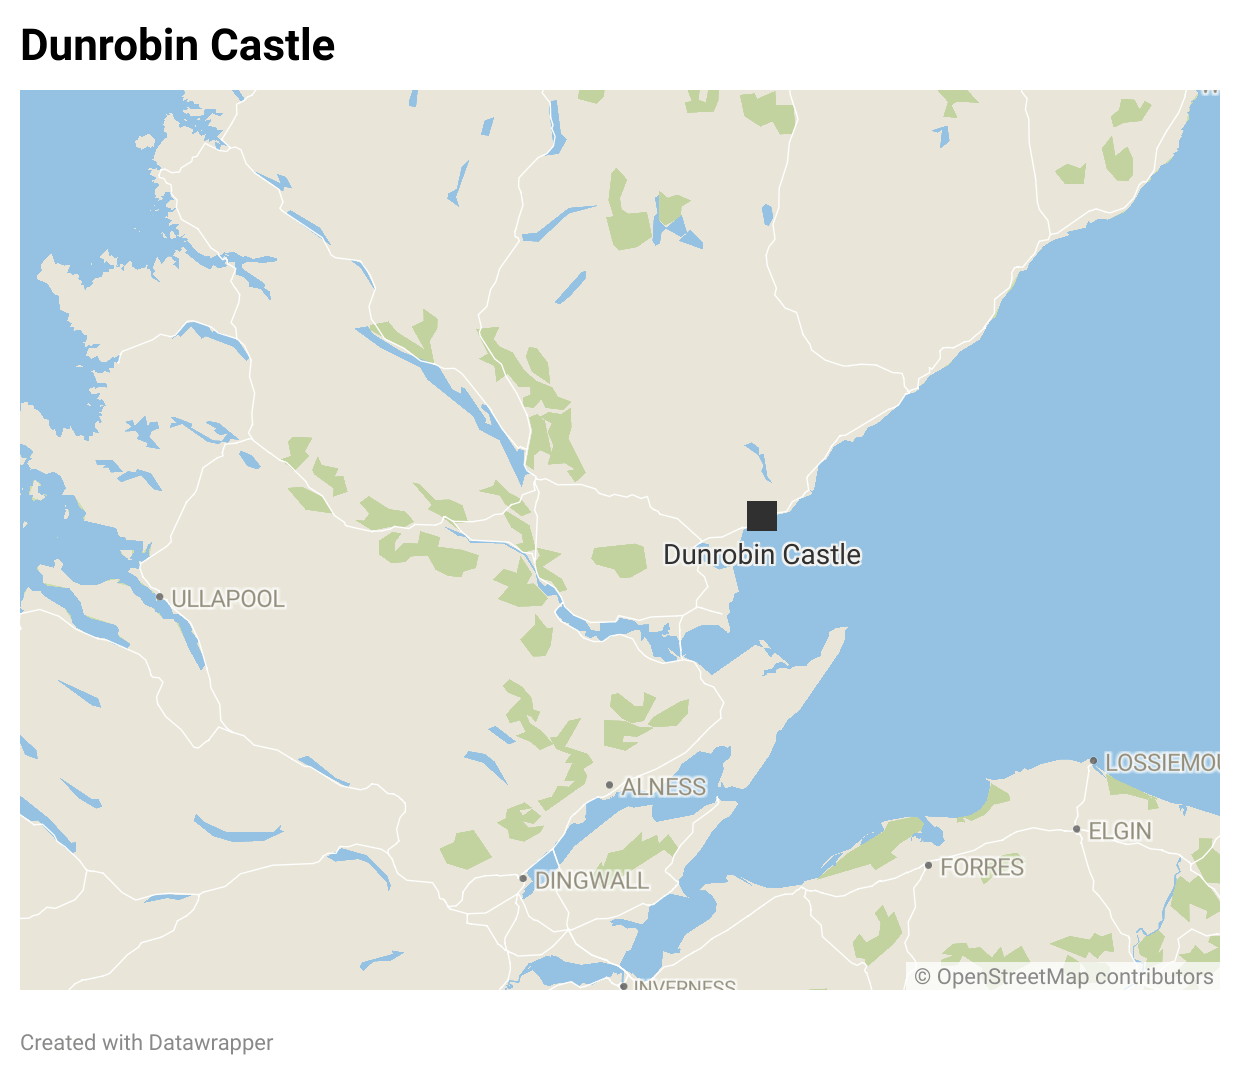 Dunrobin Castle is situated 50 miles north of Inverness.